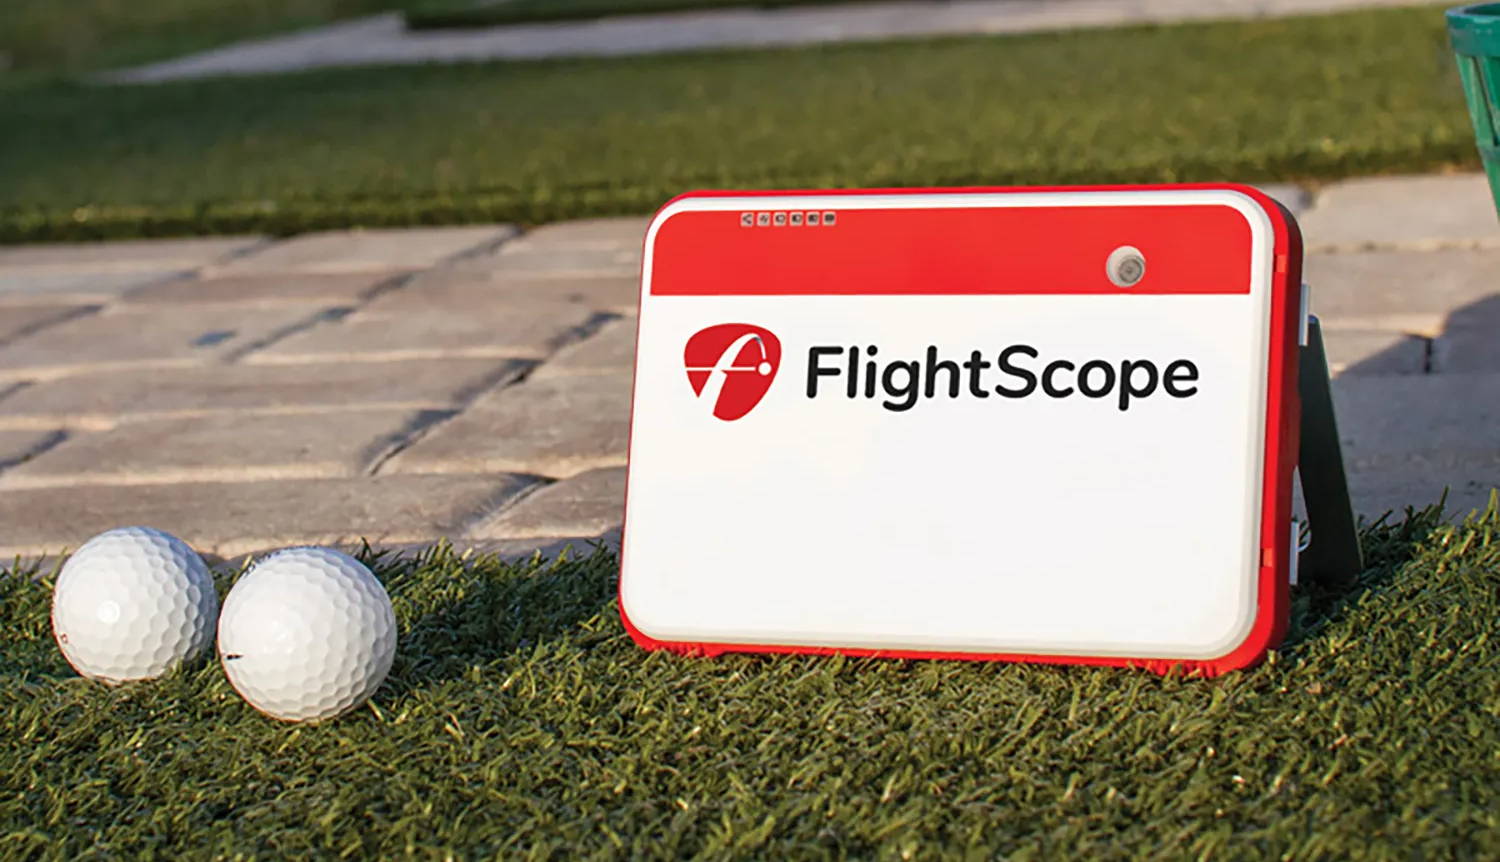 The FlightScope Mevo+ golf launch monitor sitting on the grass next to 2 golf balls and a stone patio